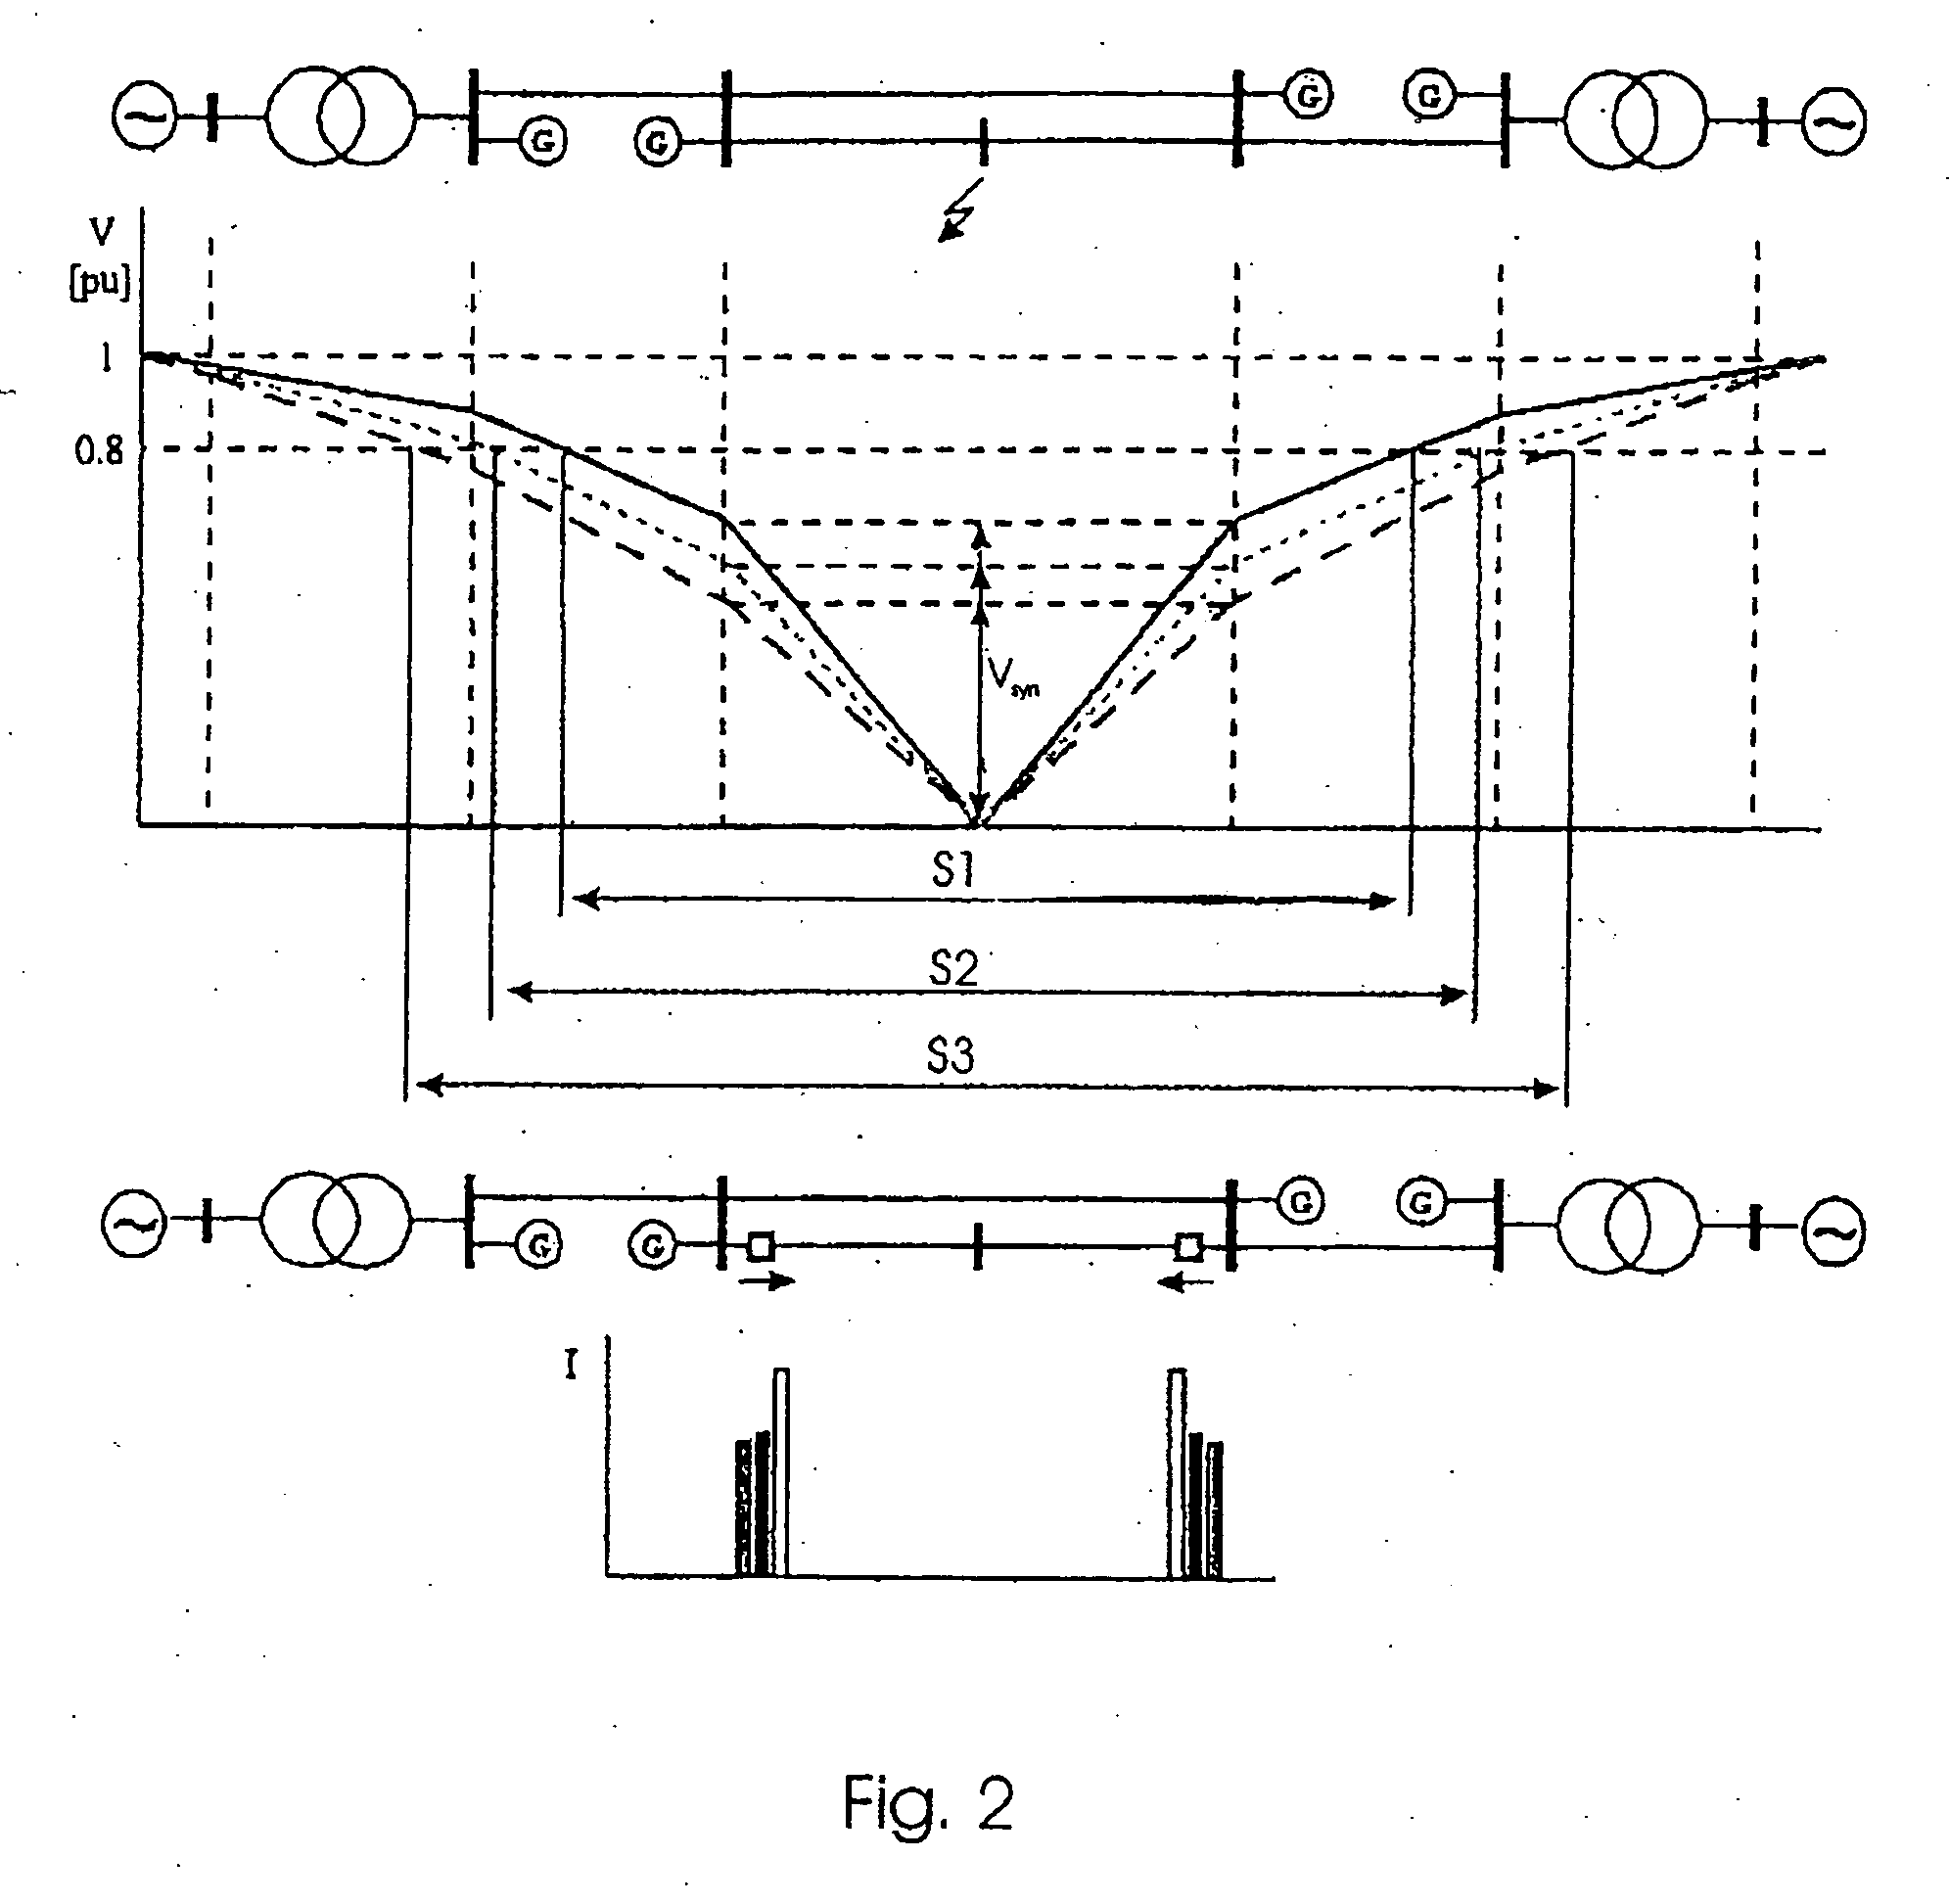 Method for operating a wind turbine during a disturbance in the grid